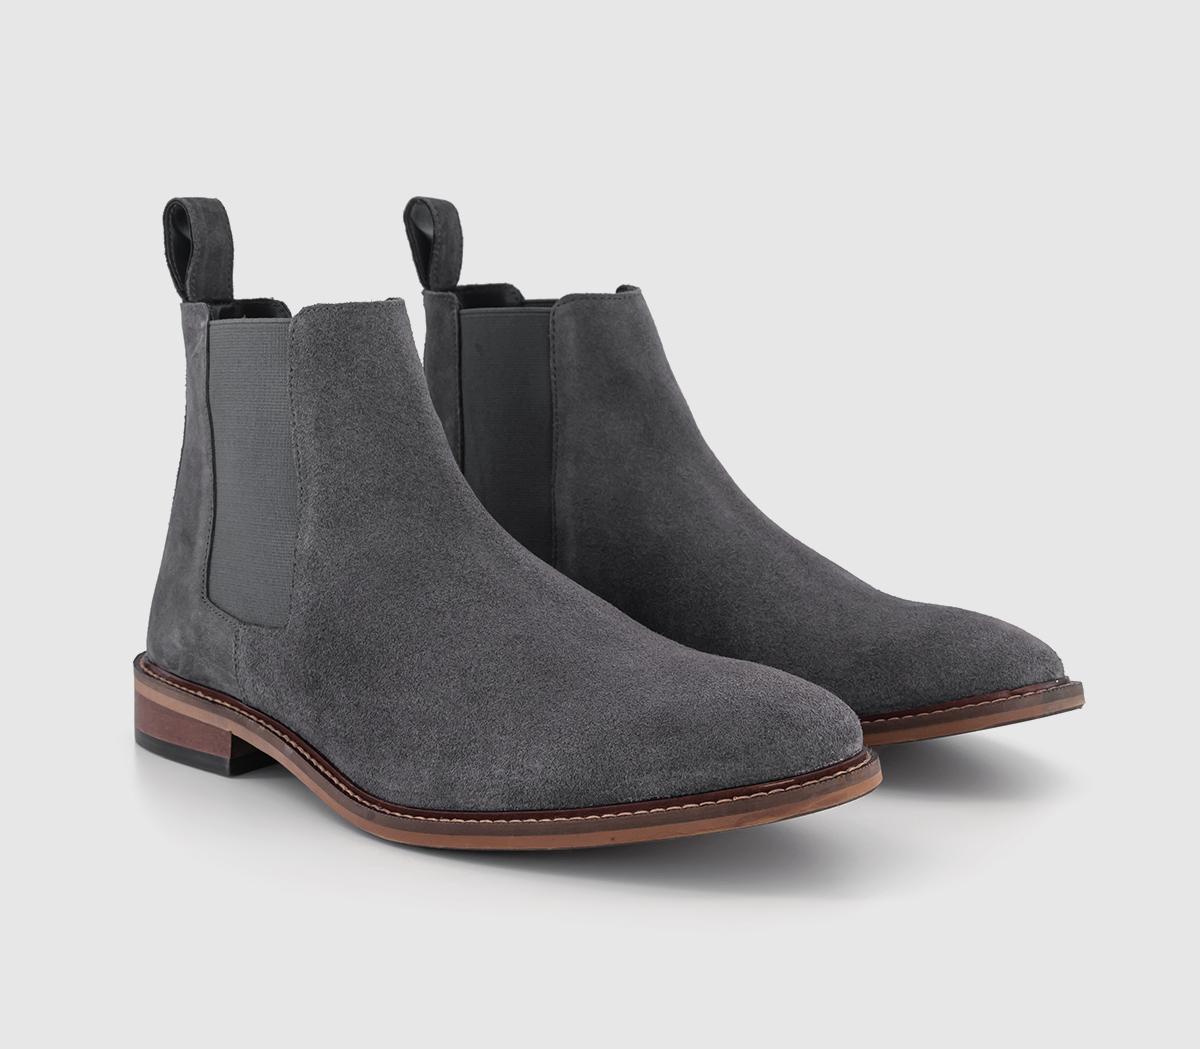 OFFICE Mens Beacon Chelsea Boots Grey Suede, 11